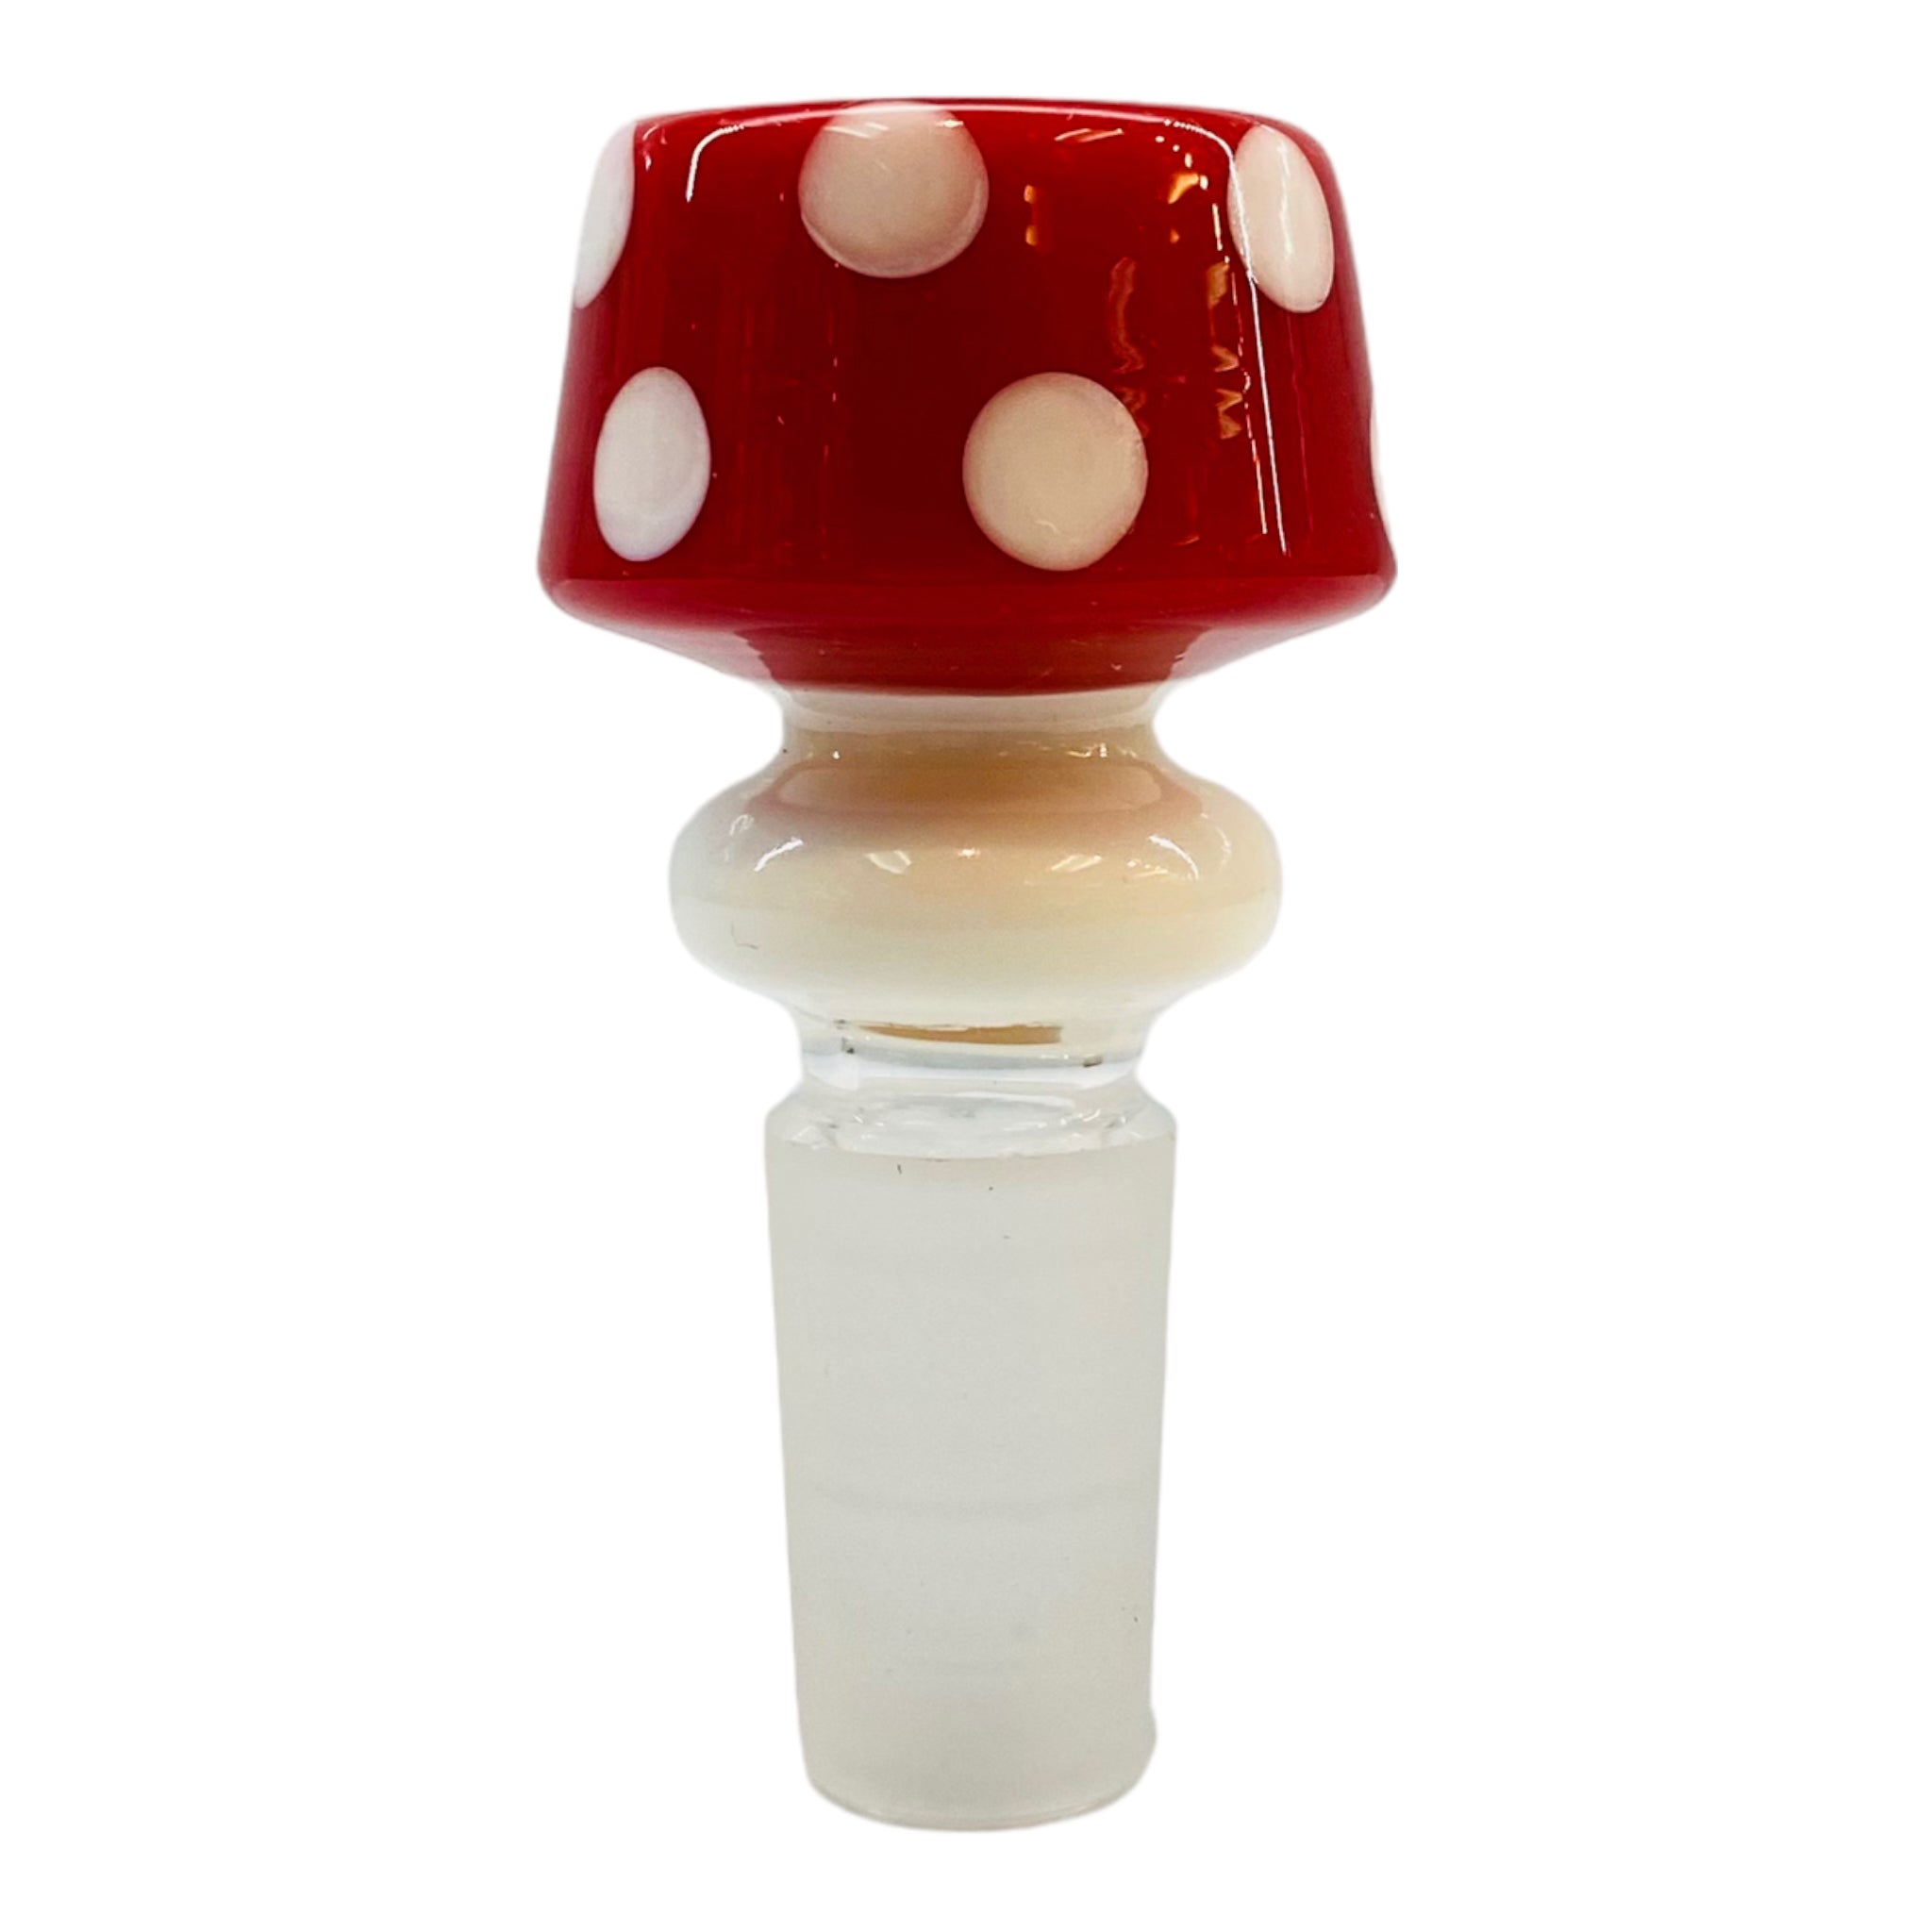 14mm Flower Bowl - Mushroom Cap Bong Bowl Piece - Red And White